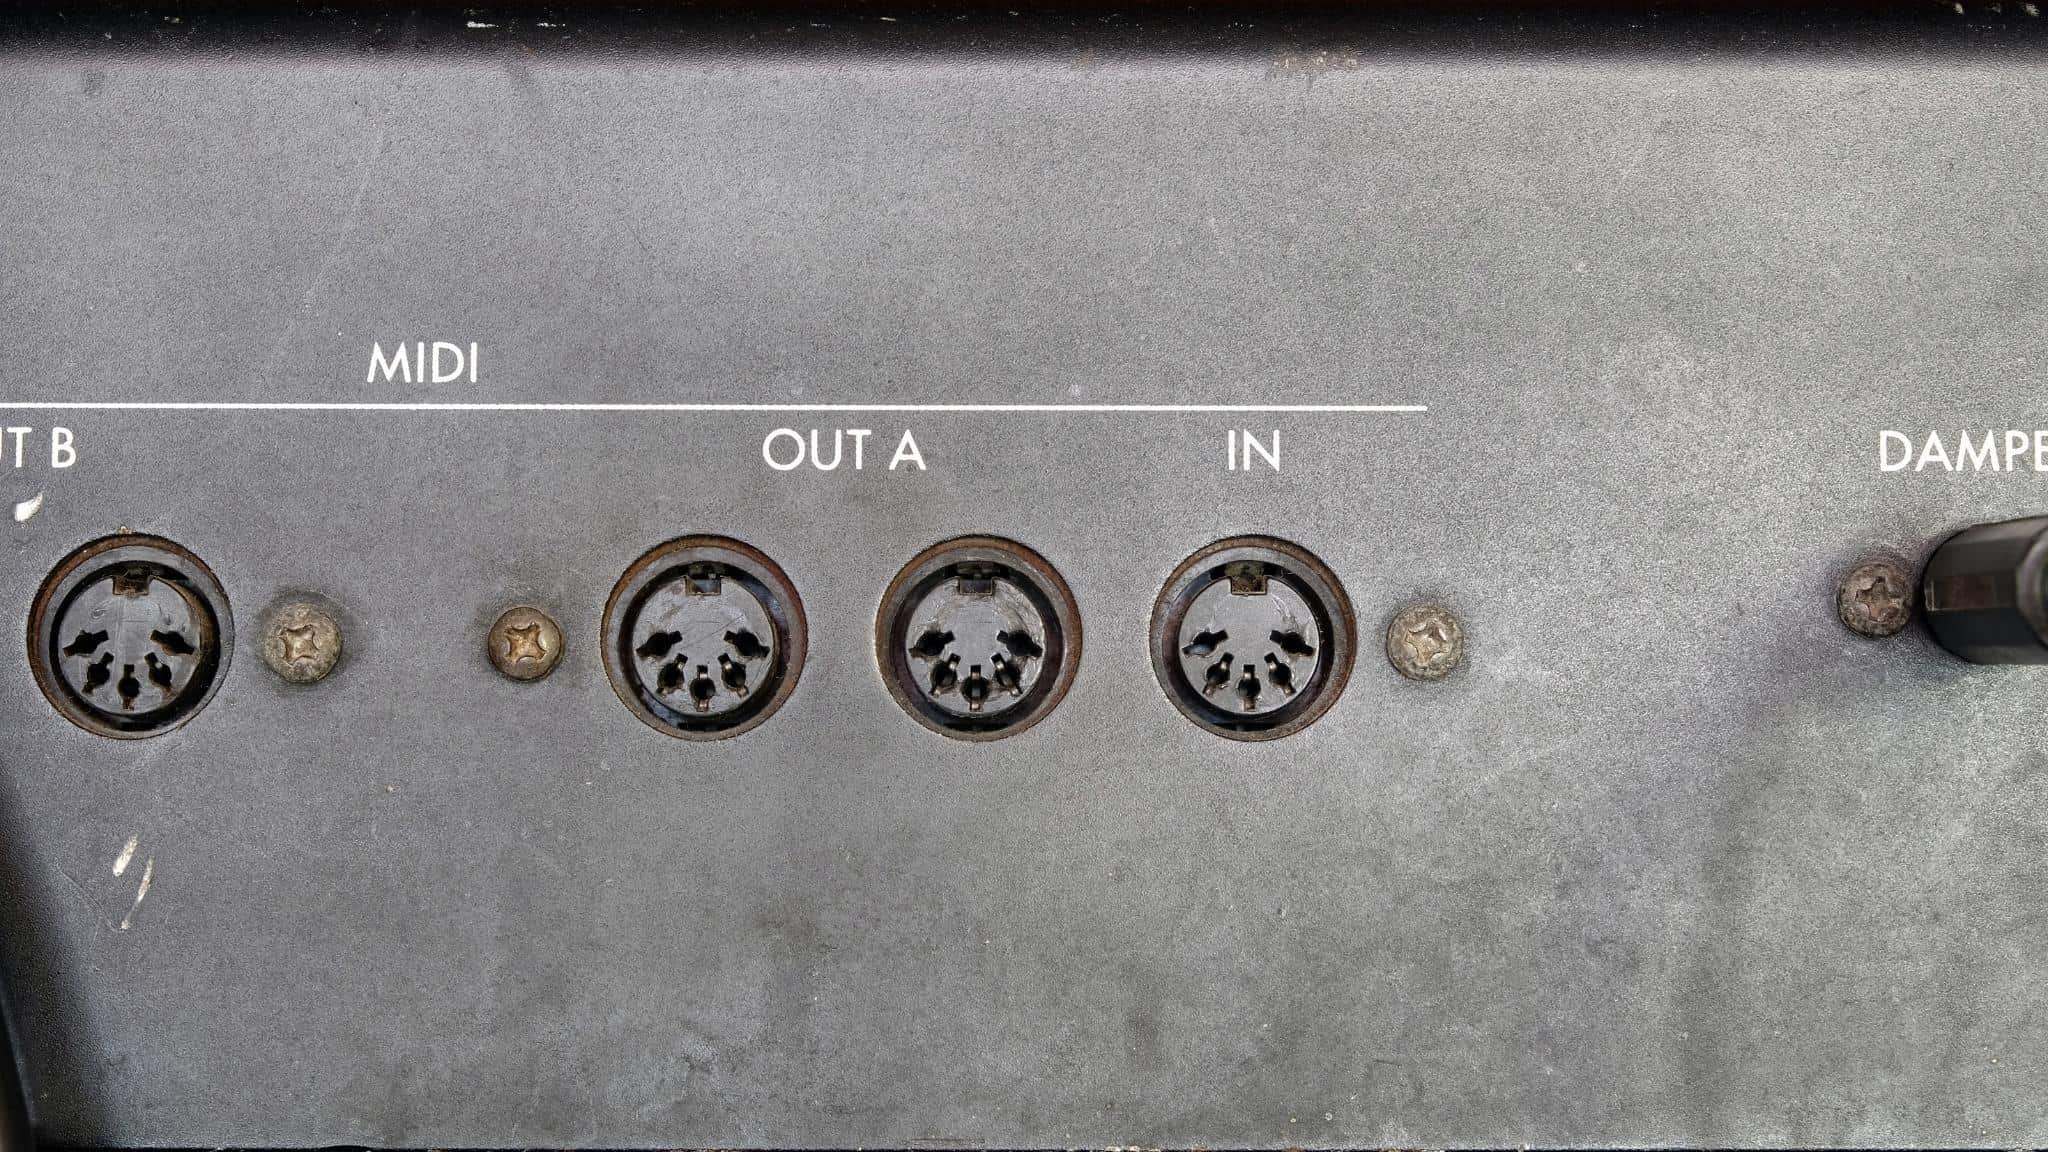 Midi in and out connections